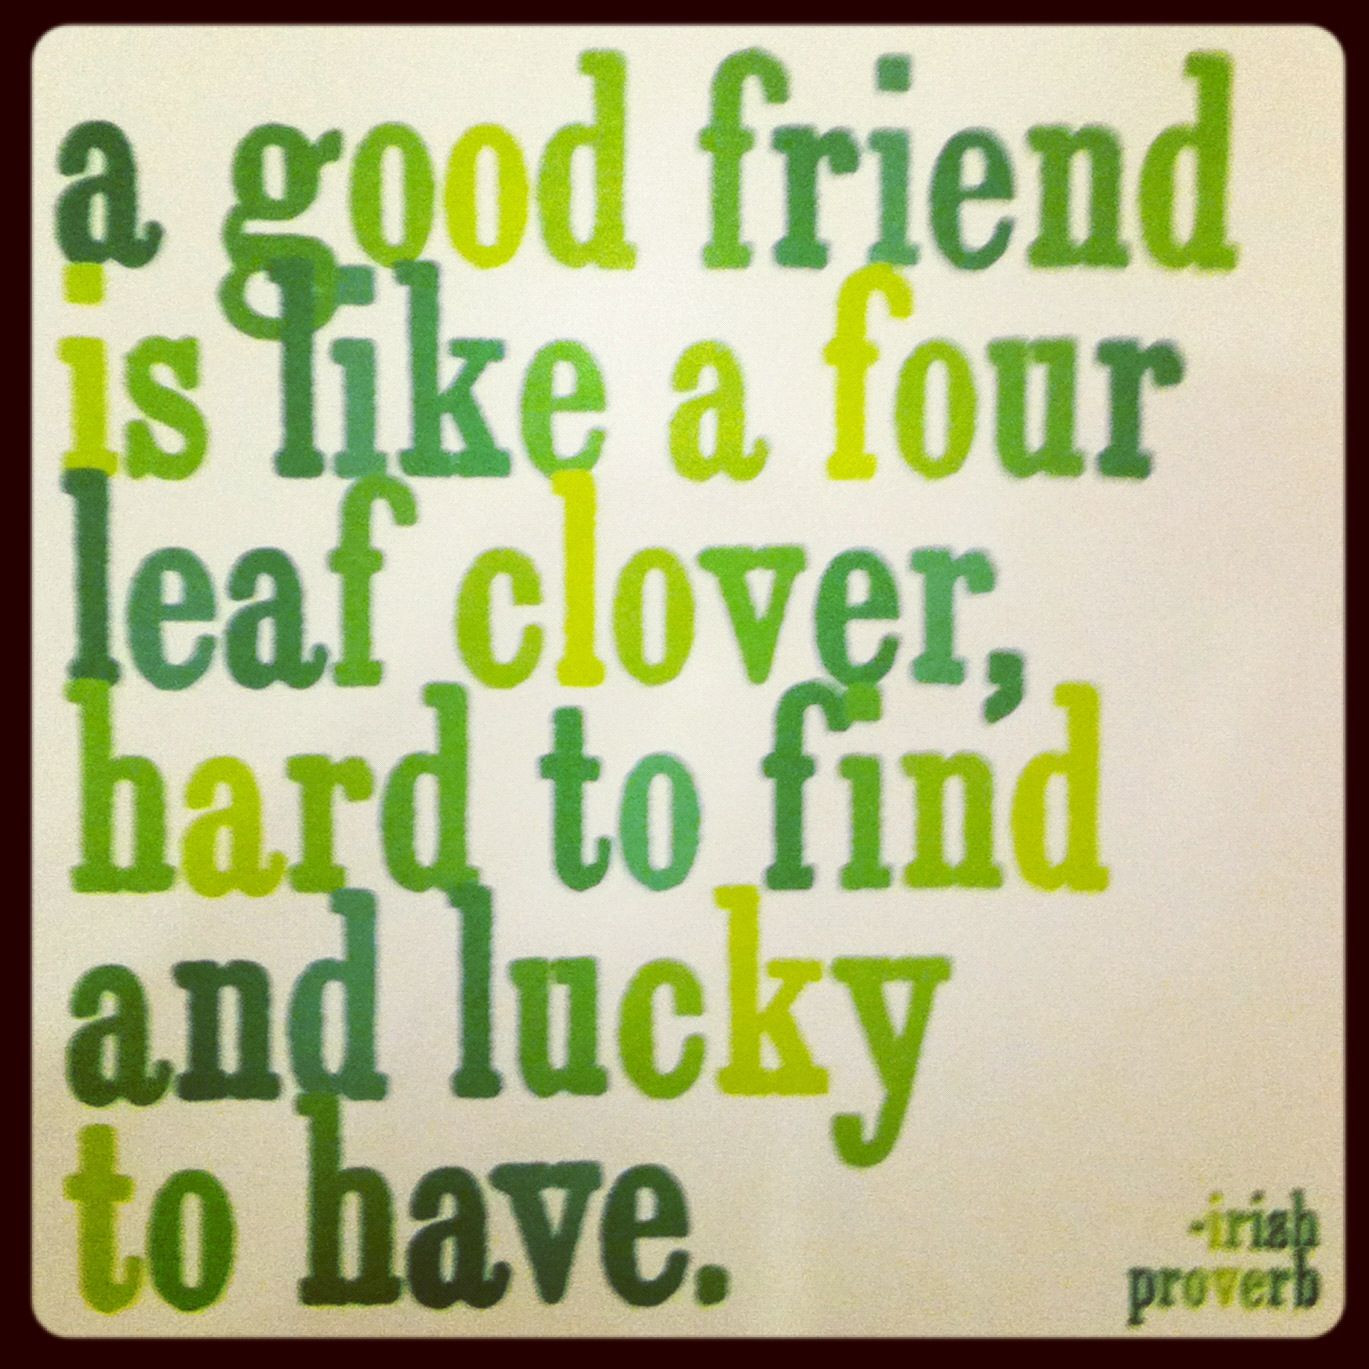 Quotes On Good Friendship
 A Good Friend Is Like A Four Leaf Clover s